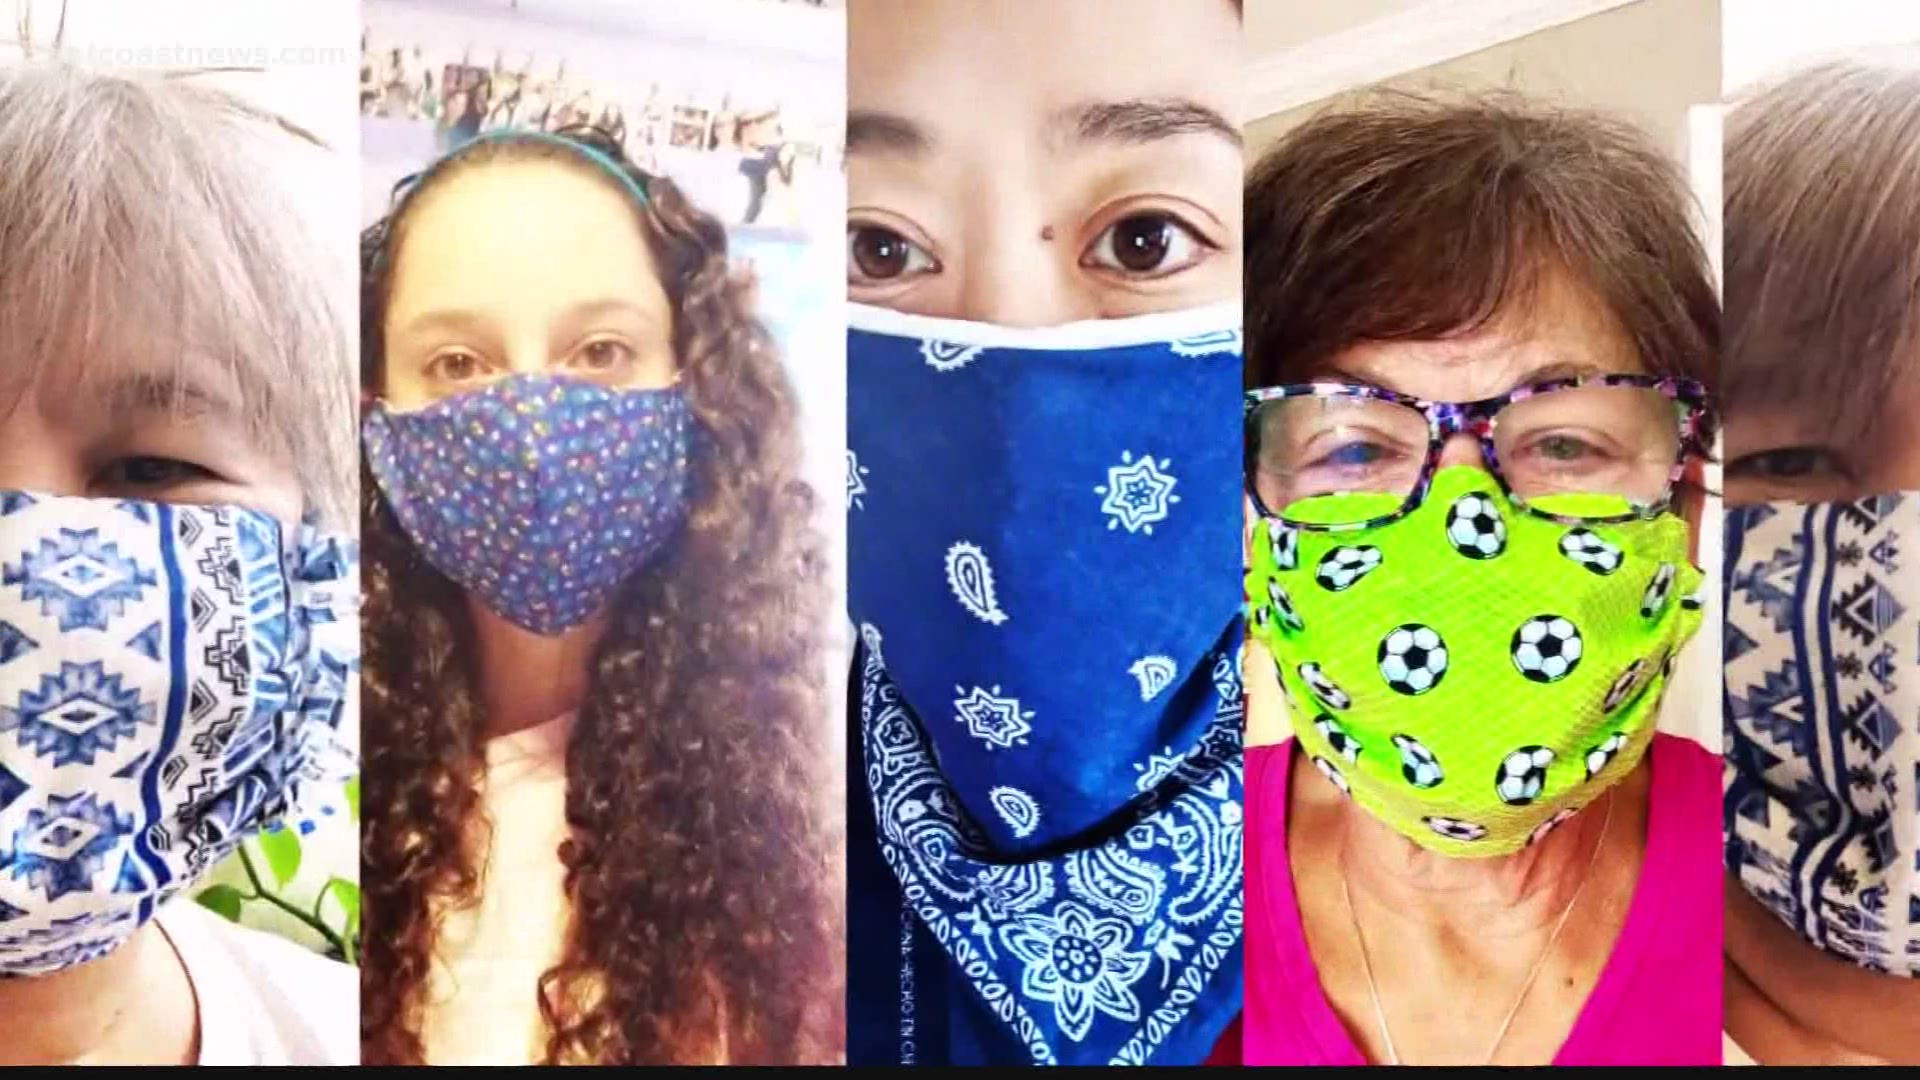 The CDC now recommends wearing masks when going in public for essential activity. Here's how to make your own.